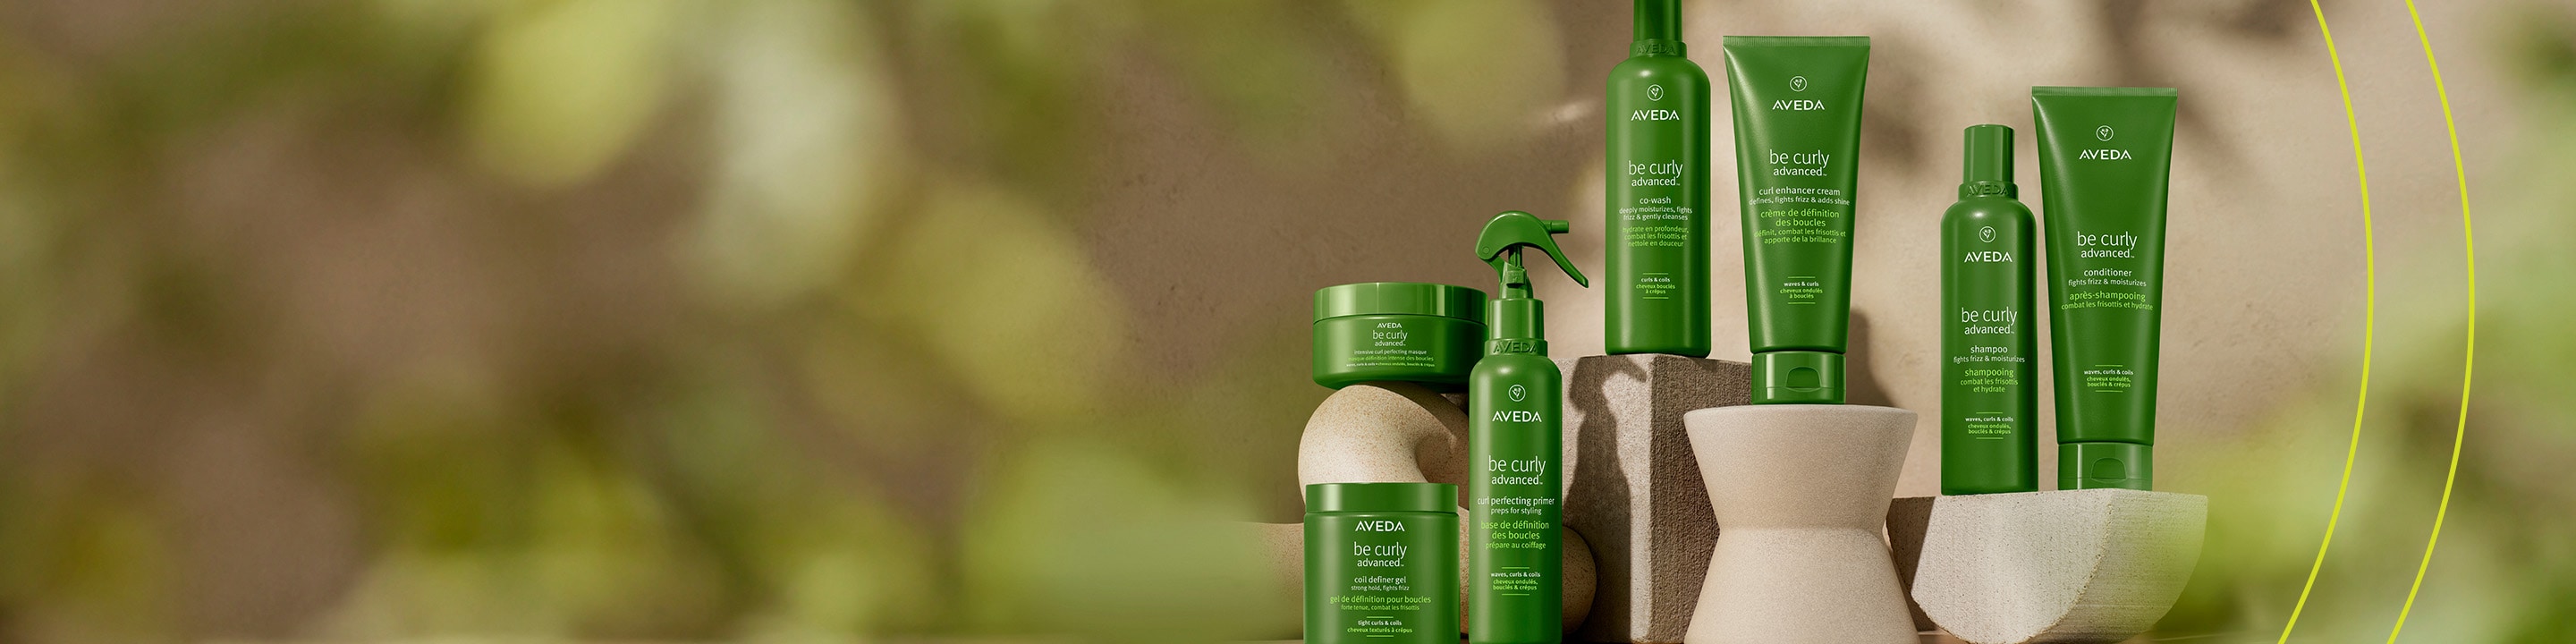 be curly advanced™